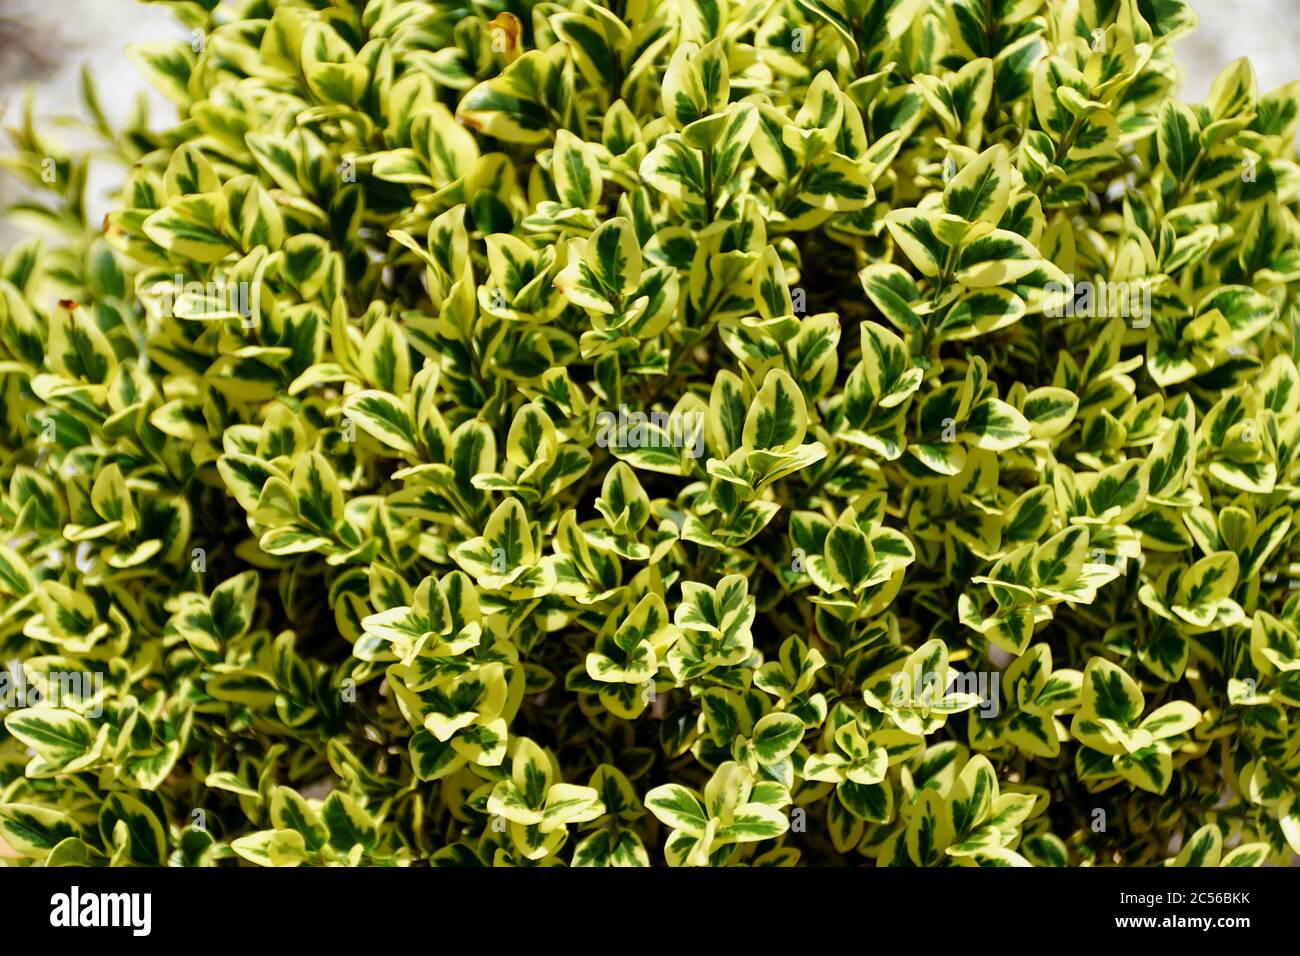 A yellow and green bush of variegated boxwood plant Stock Photo